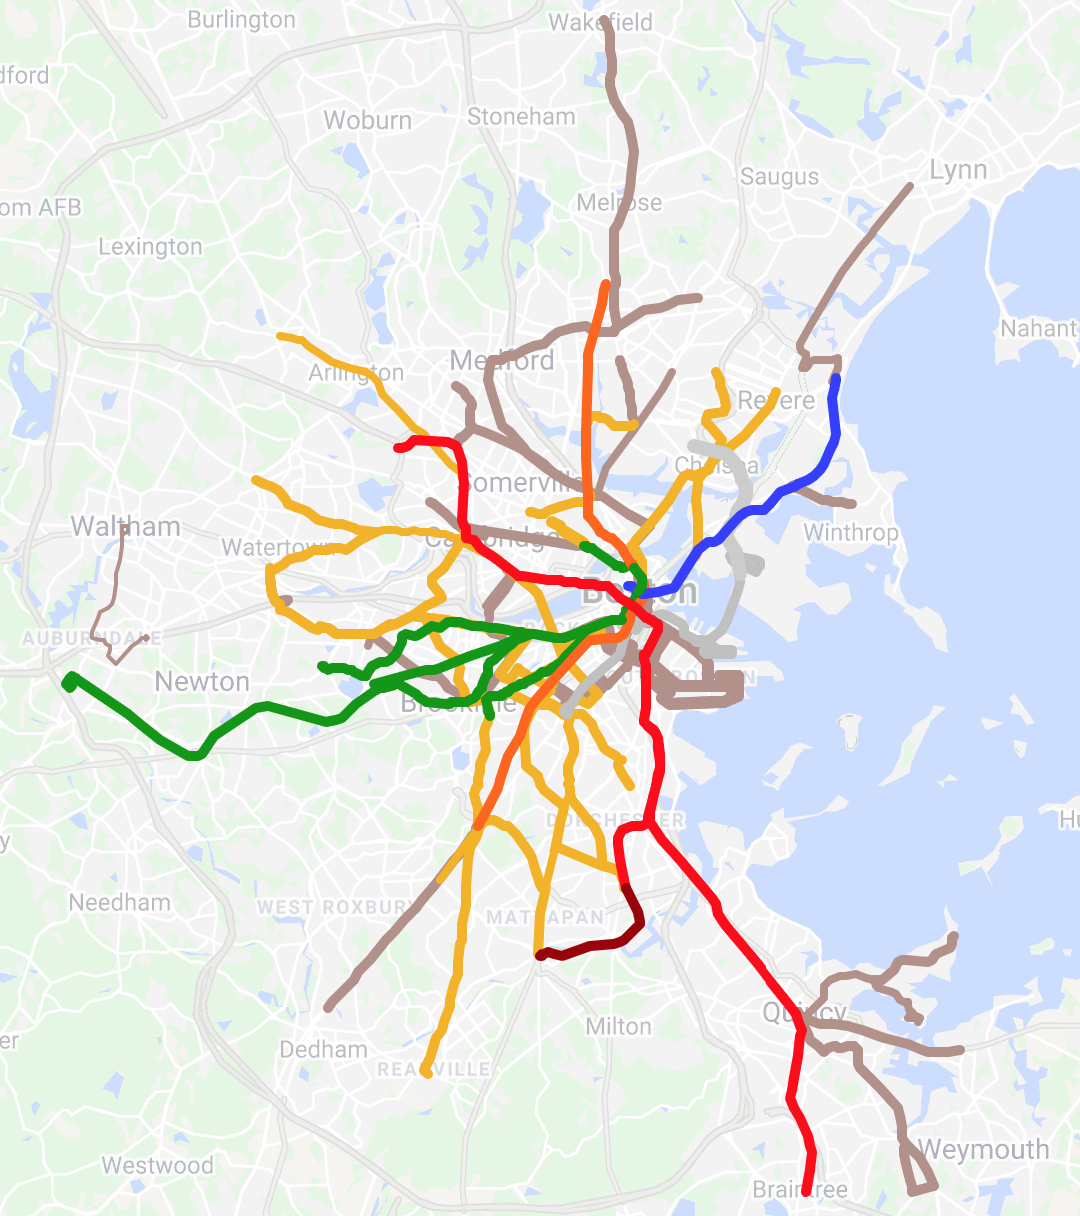 MBTA Subway + Frequent Bus.png